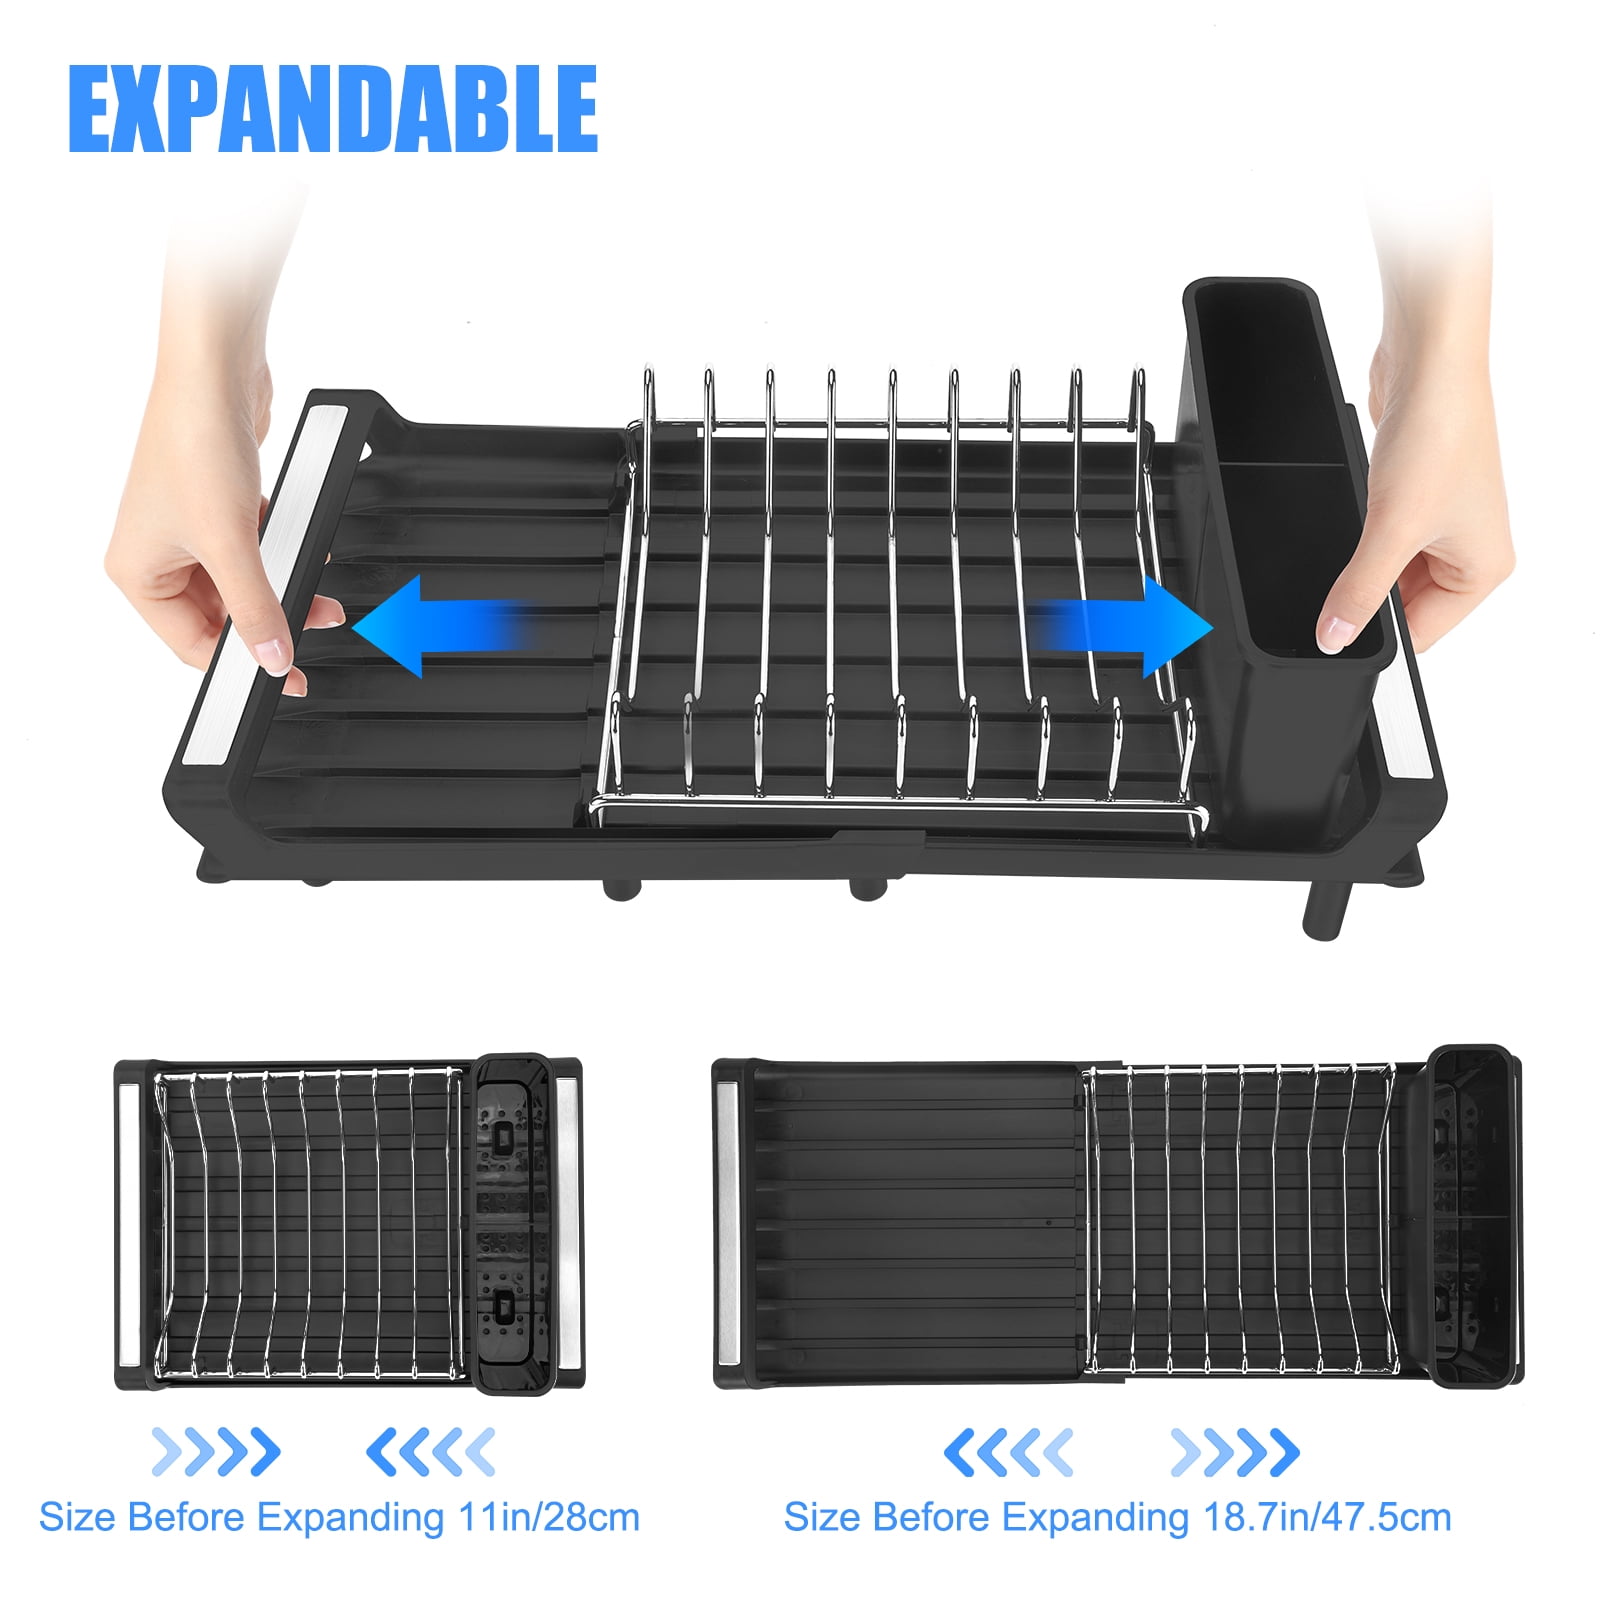 Warome Dish Drainer, Expandable Dish Rack and Drainboard Set,  Adjustable(13.2-19.3), Black Dish Drying Rack with Utensil Holder,Small  Dish Strainers for Sale in Ontario, CA - OfferUp